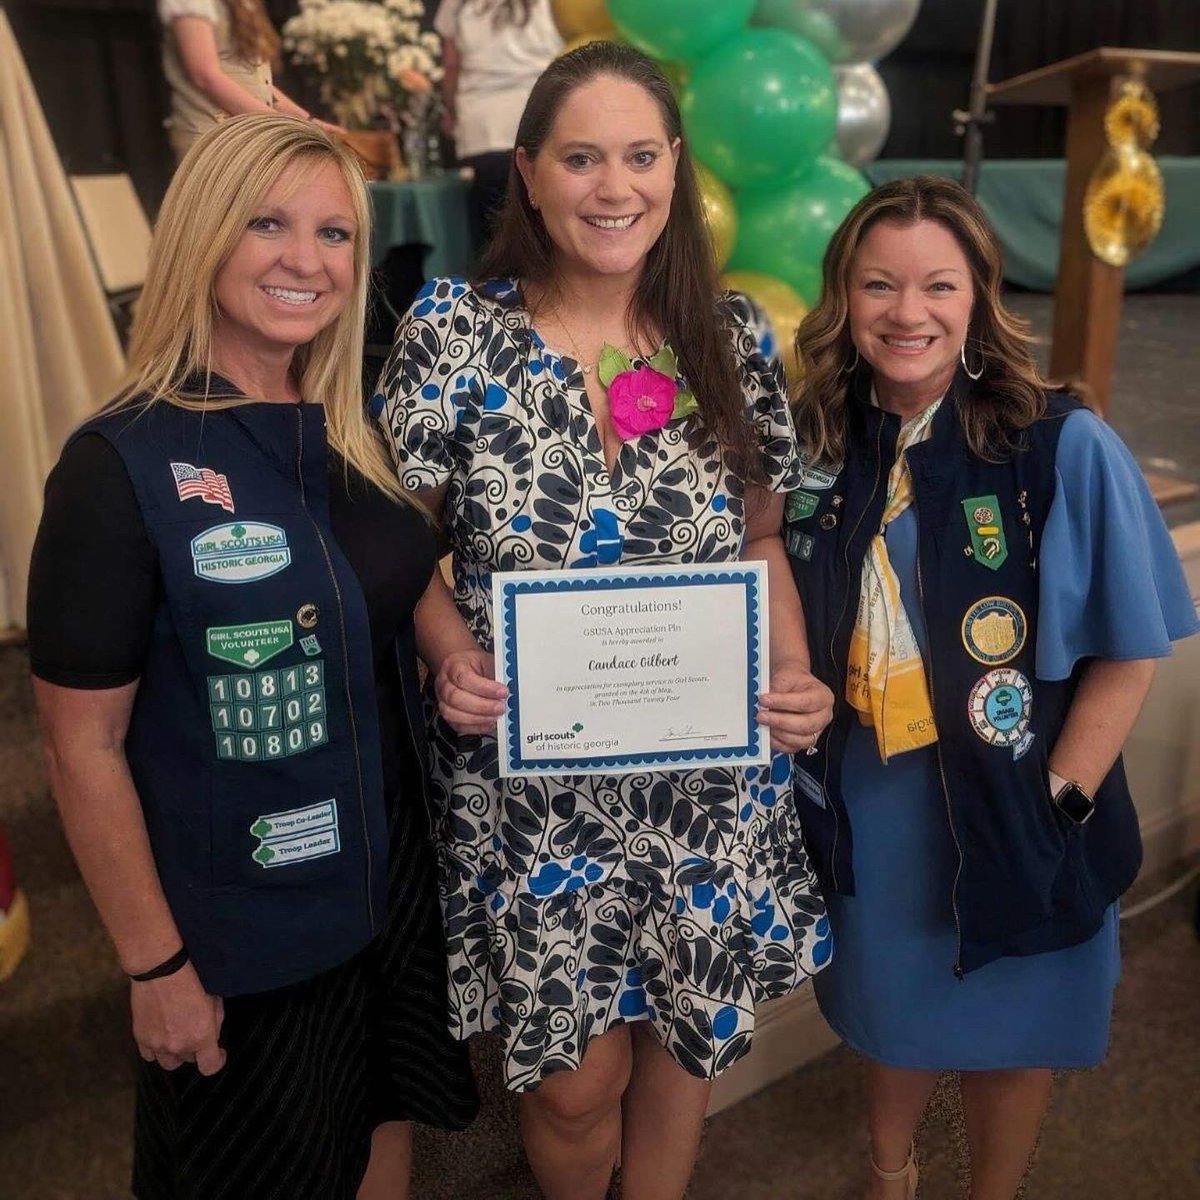 Congrats CCS Training and Communications Manager Candace Gilbert on receiving a National Volunteer Recognition Award from @girlscouts for serving as a volunteer and cookie chair for Girl Scout Troop 10813 for the last five years and demonstrating excellent leadership for girls.